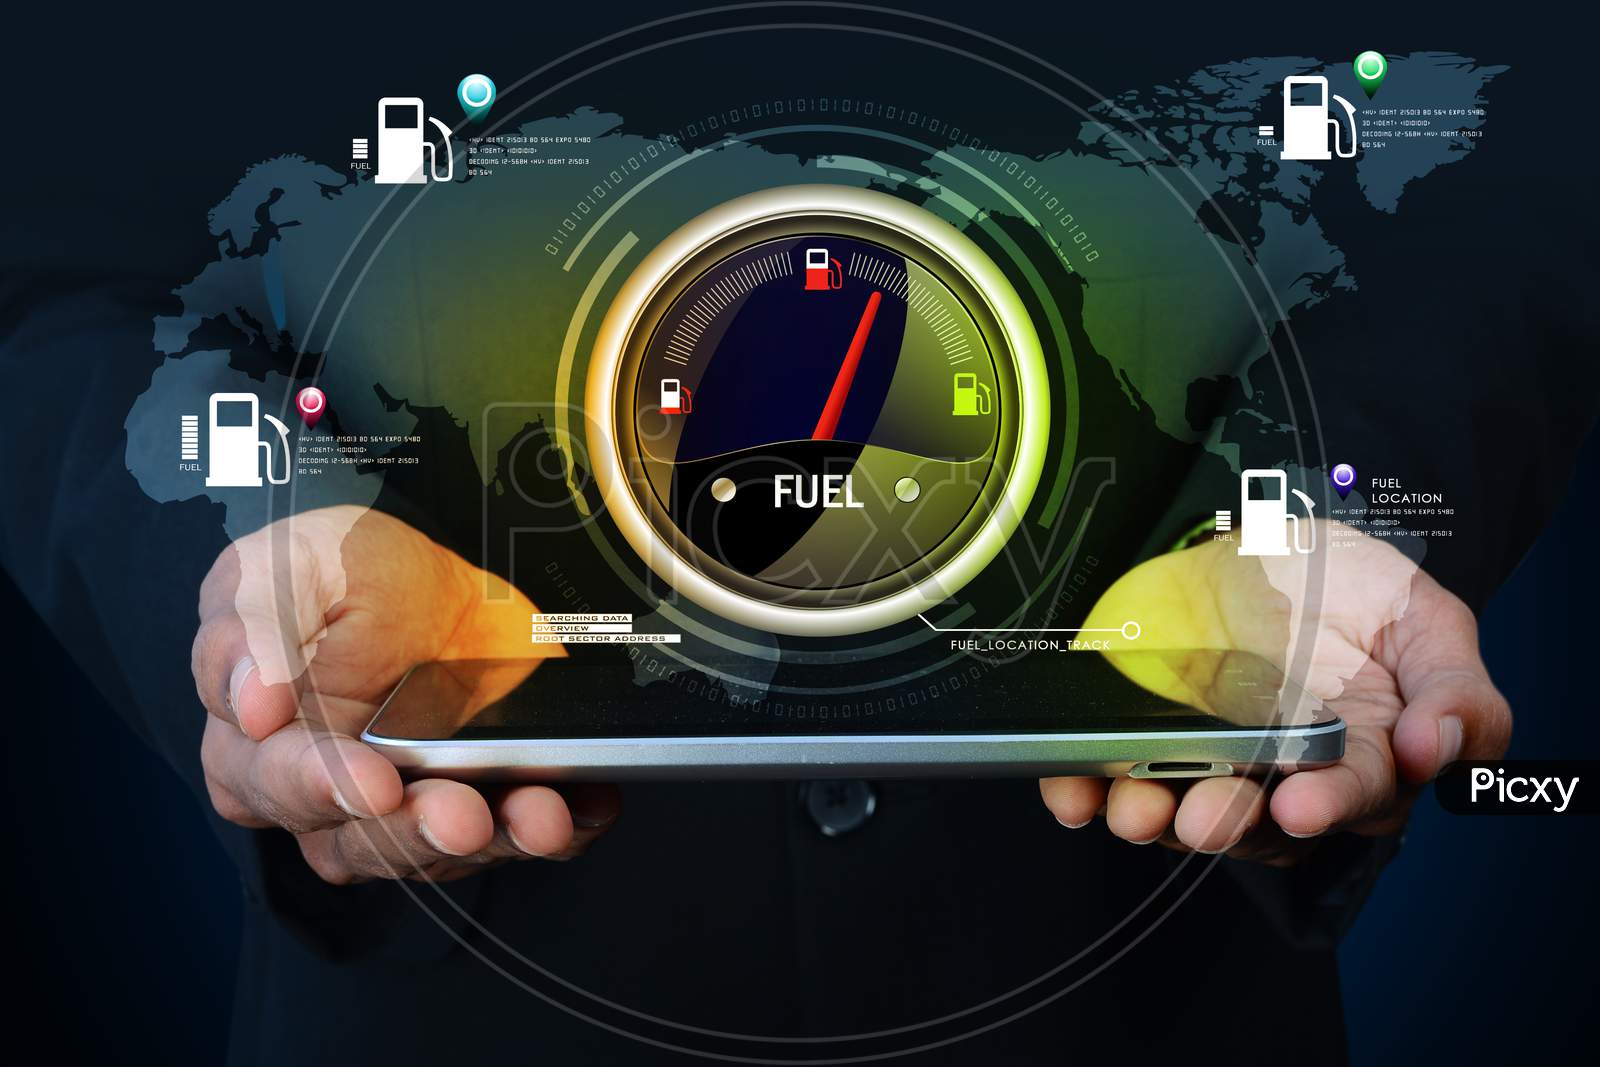 Close up shot of A Person's Hand Holding a Tablet or iPad with Fuel Indicator